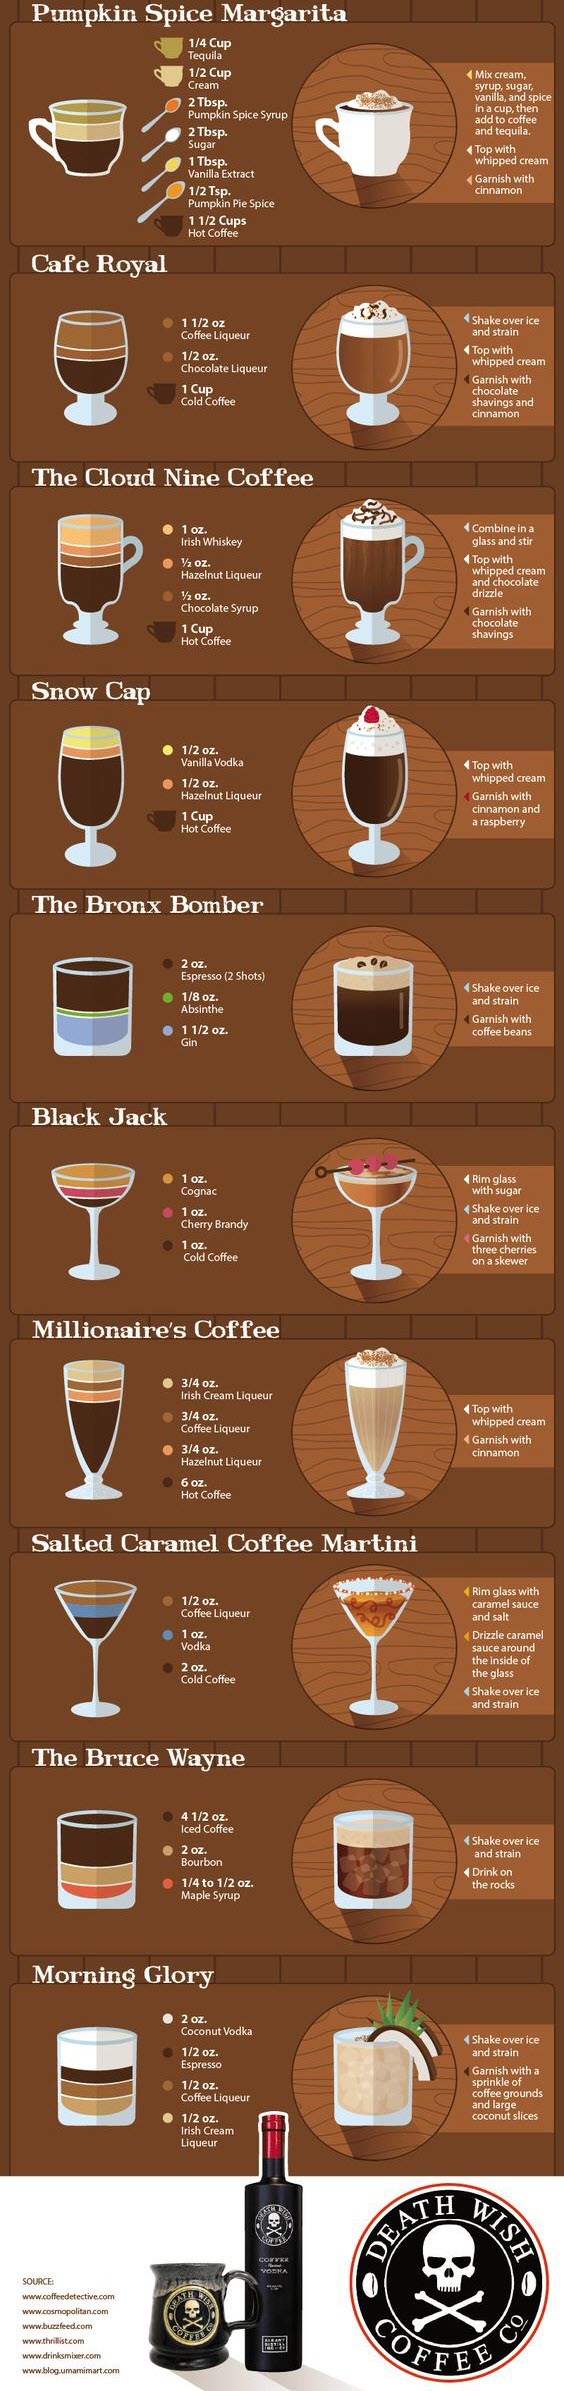 20 Spiked Coffee Cocktail Recipes INFOGRAPHIC